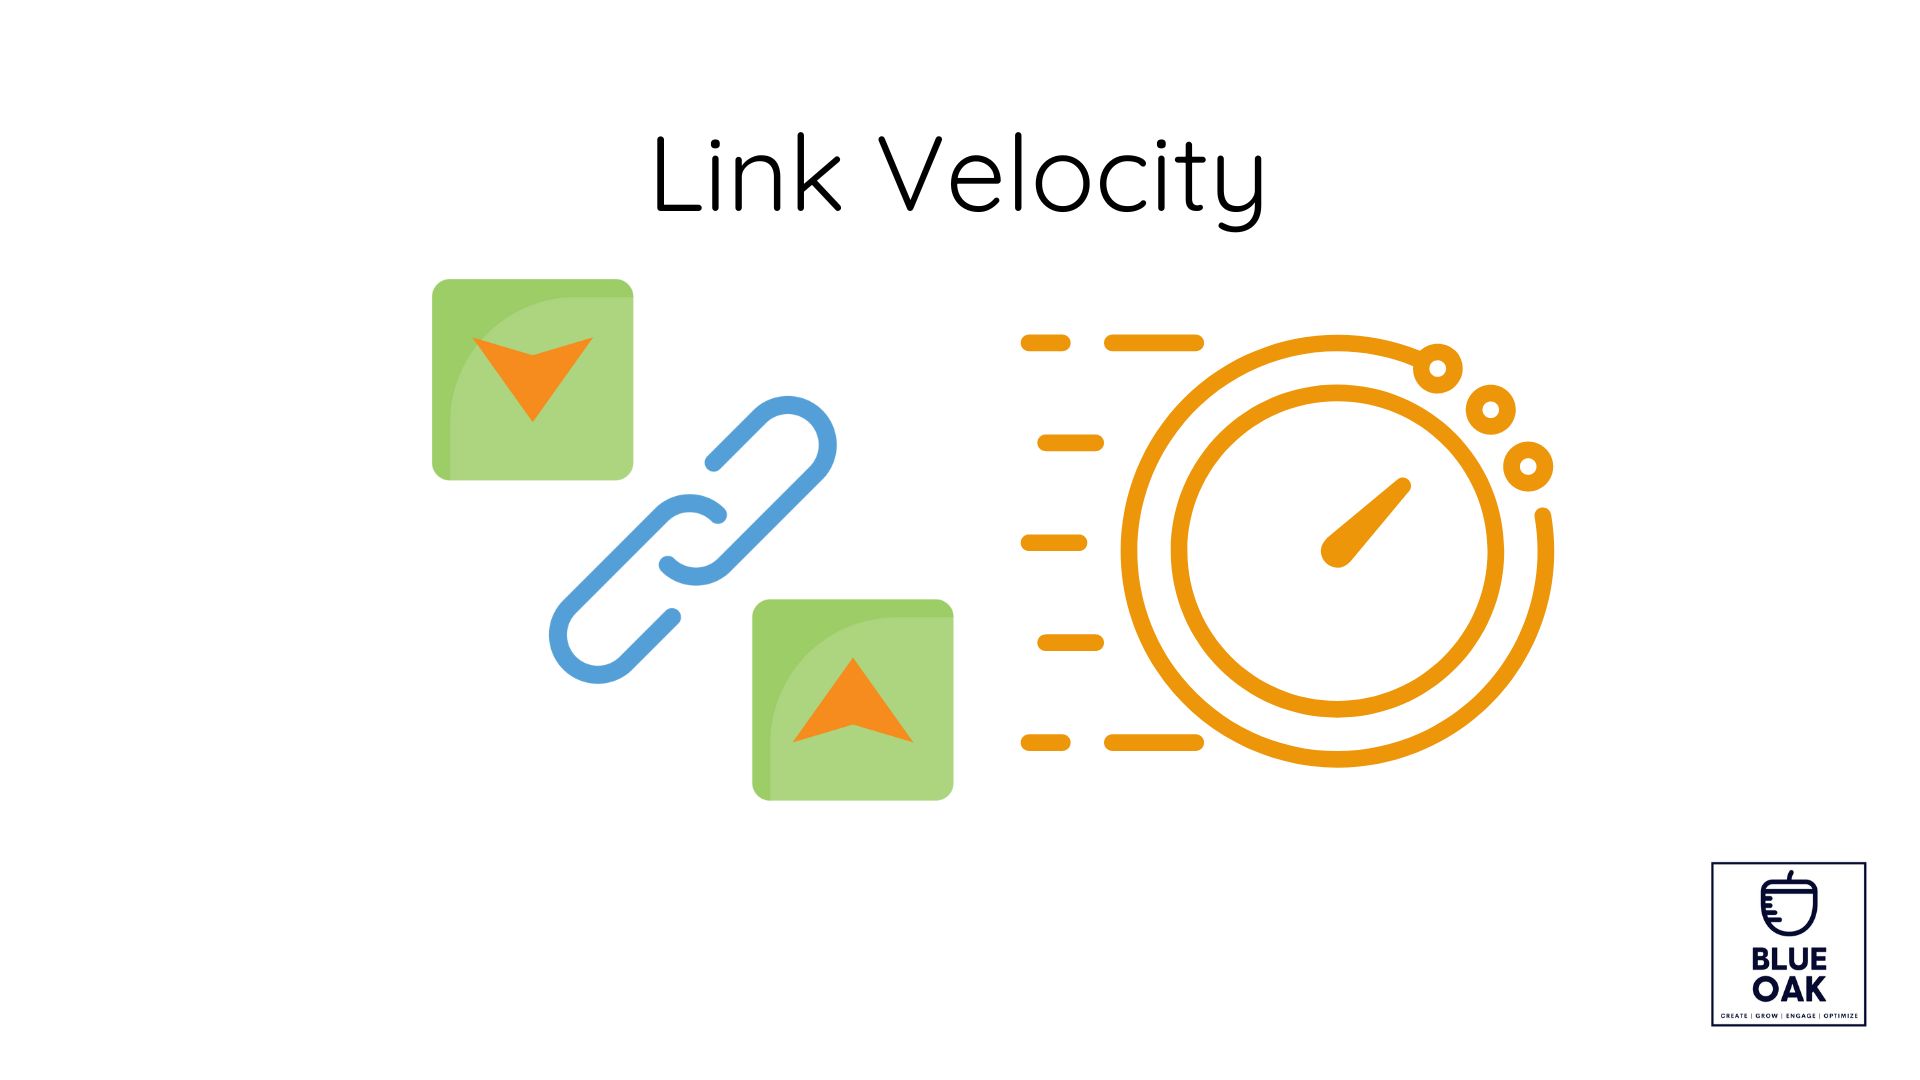 What is Link Velocity?